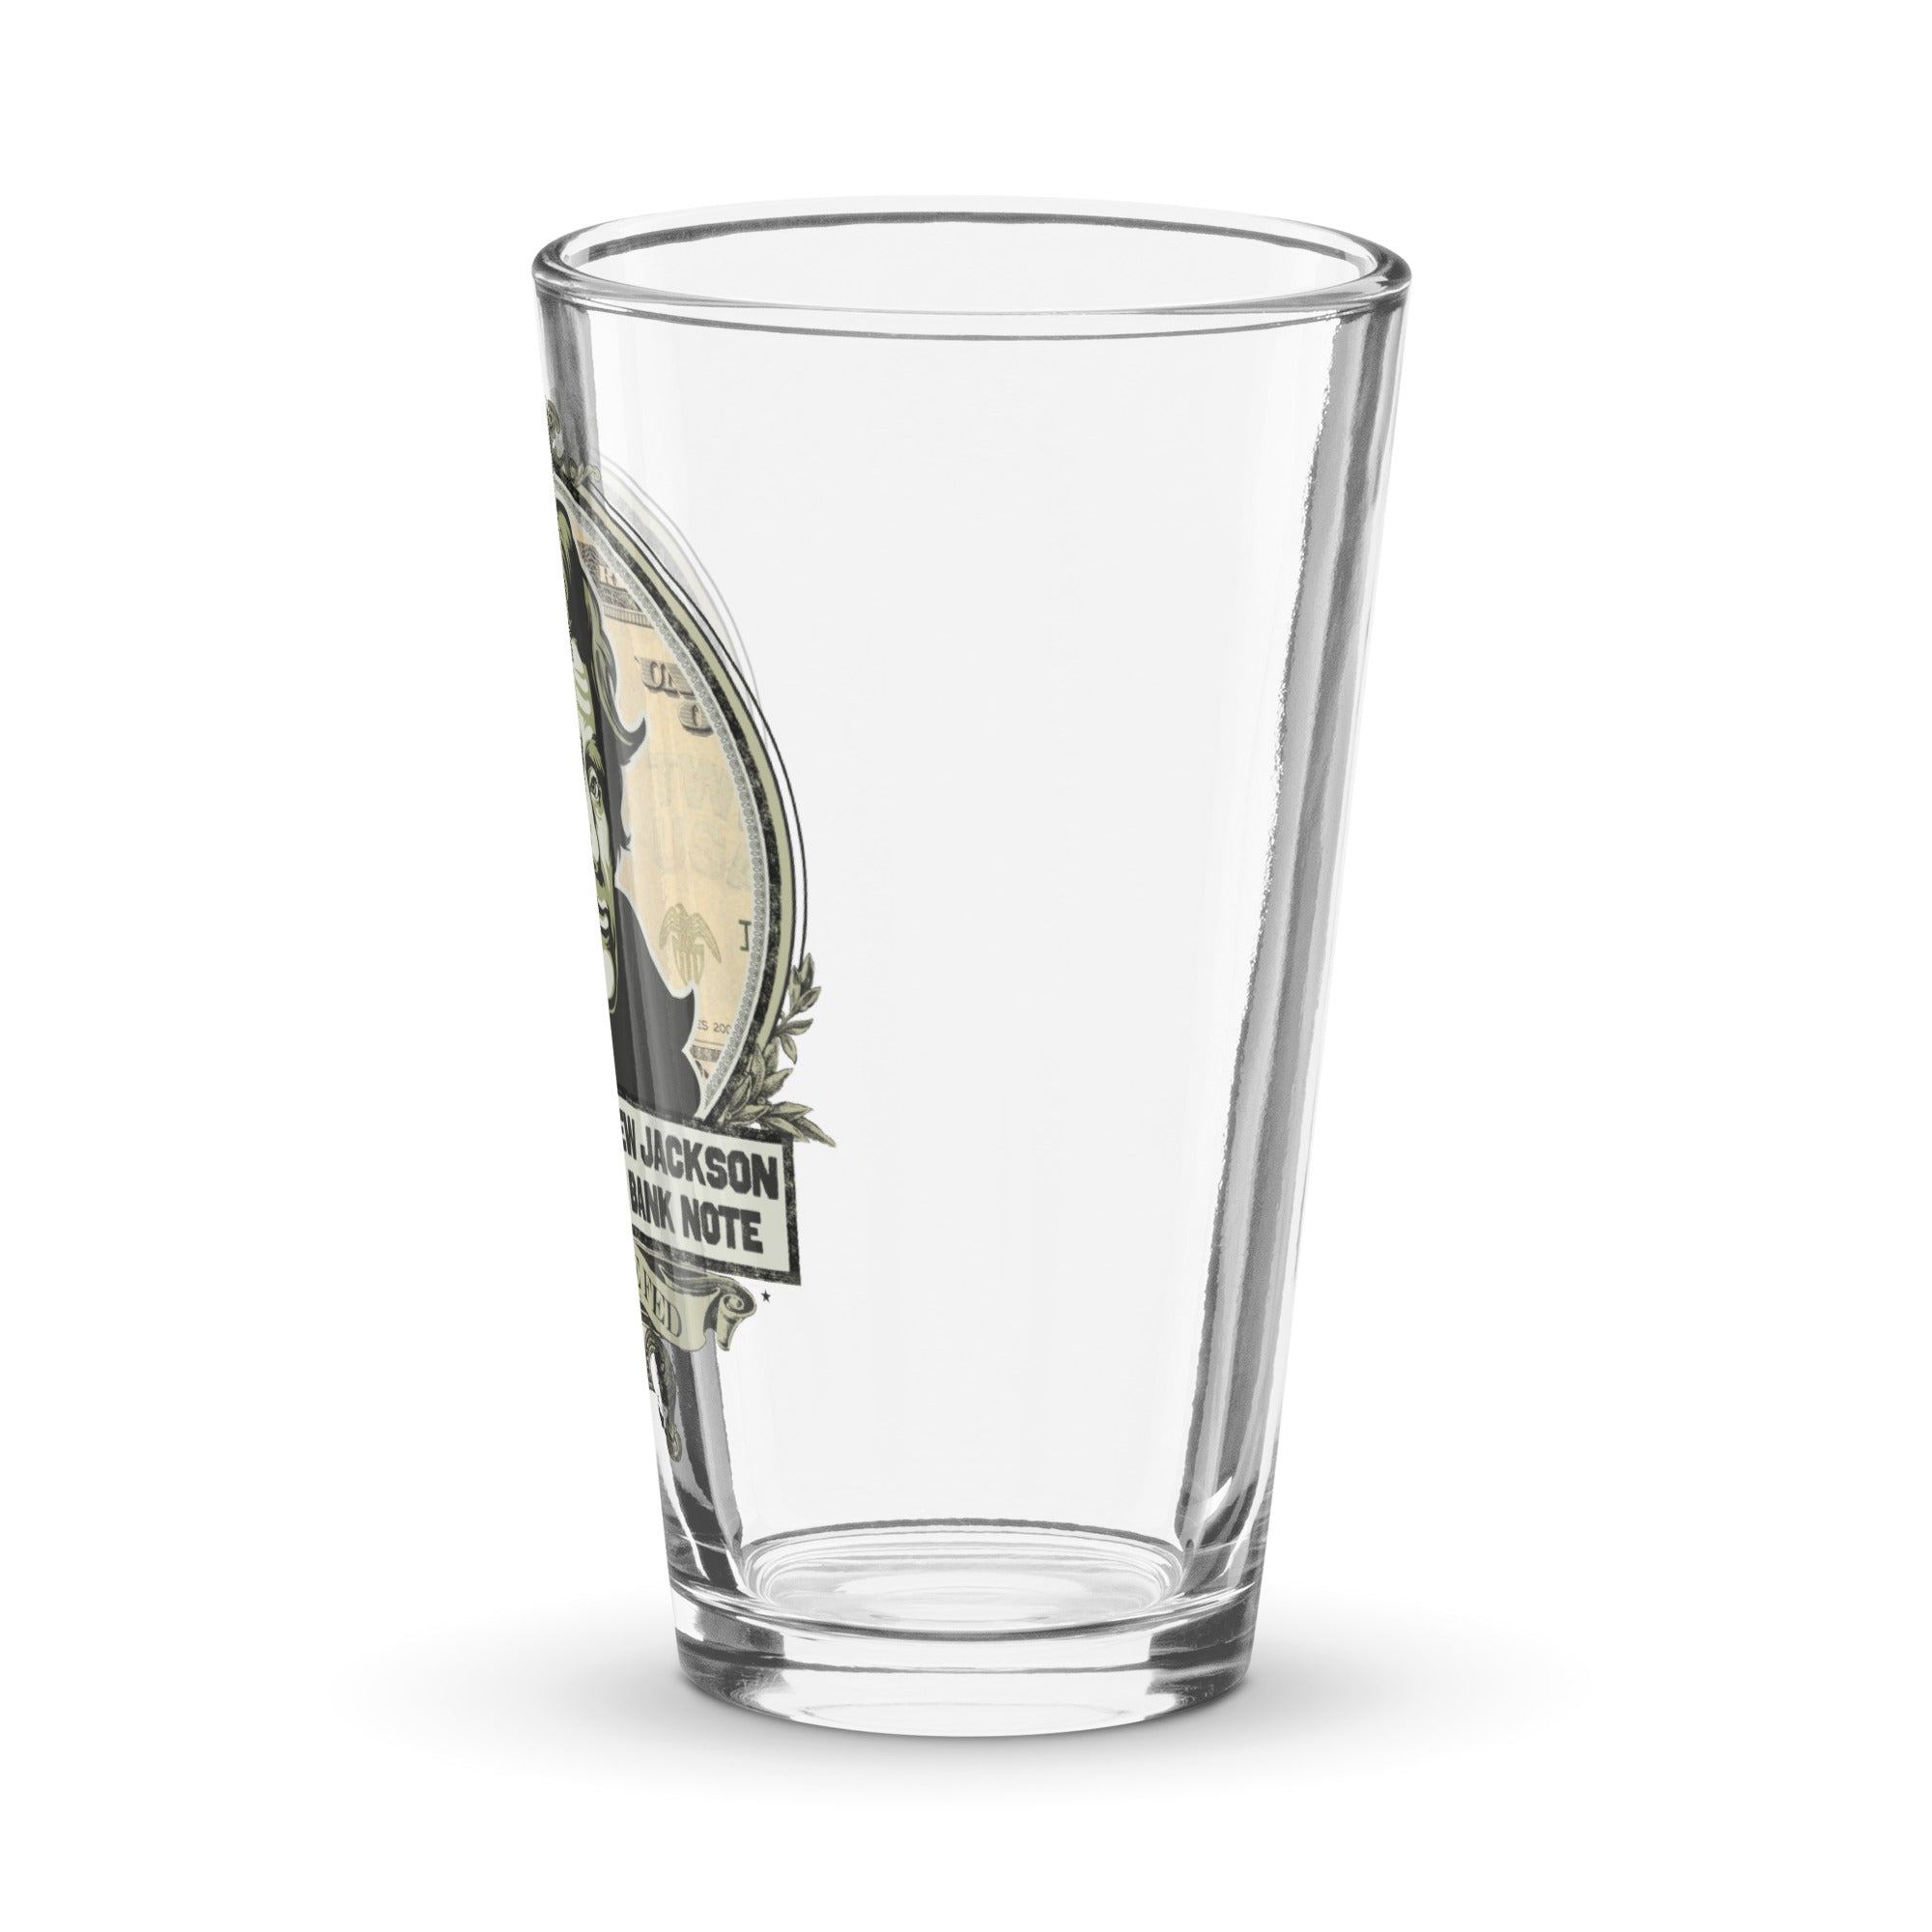 Irony is Andrew Jackson on a Central Bank Note Shaker Pint Glass